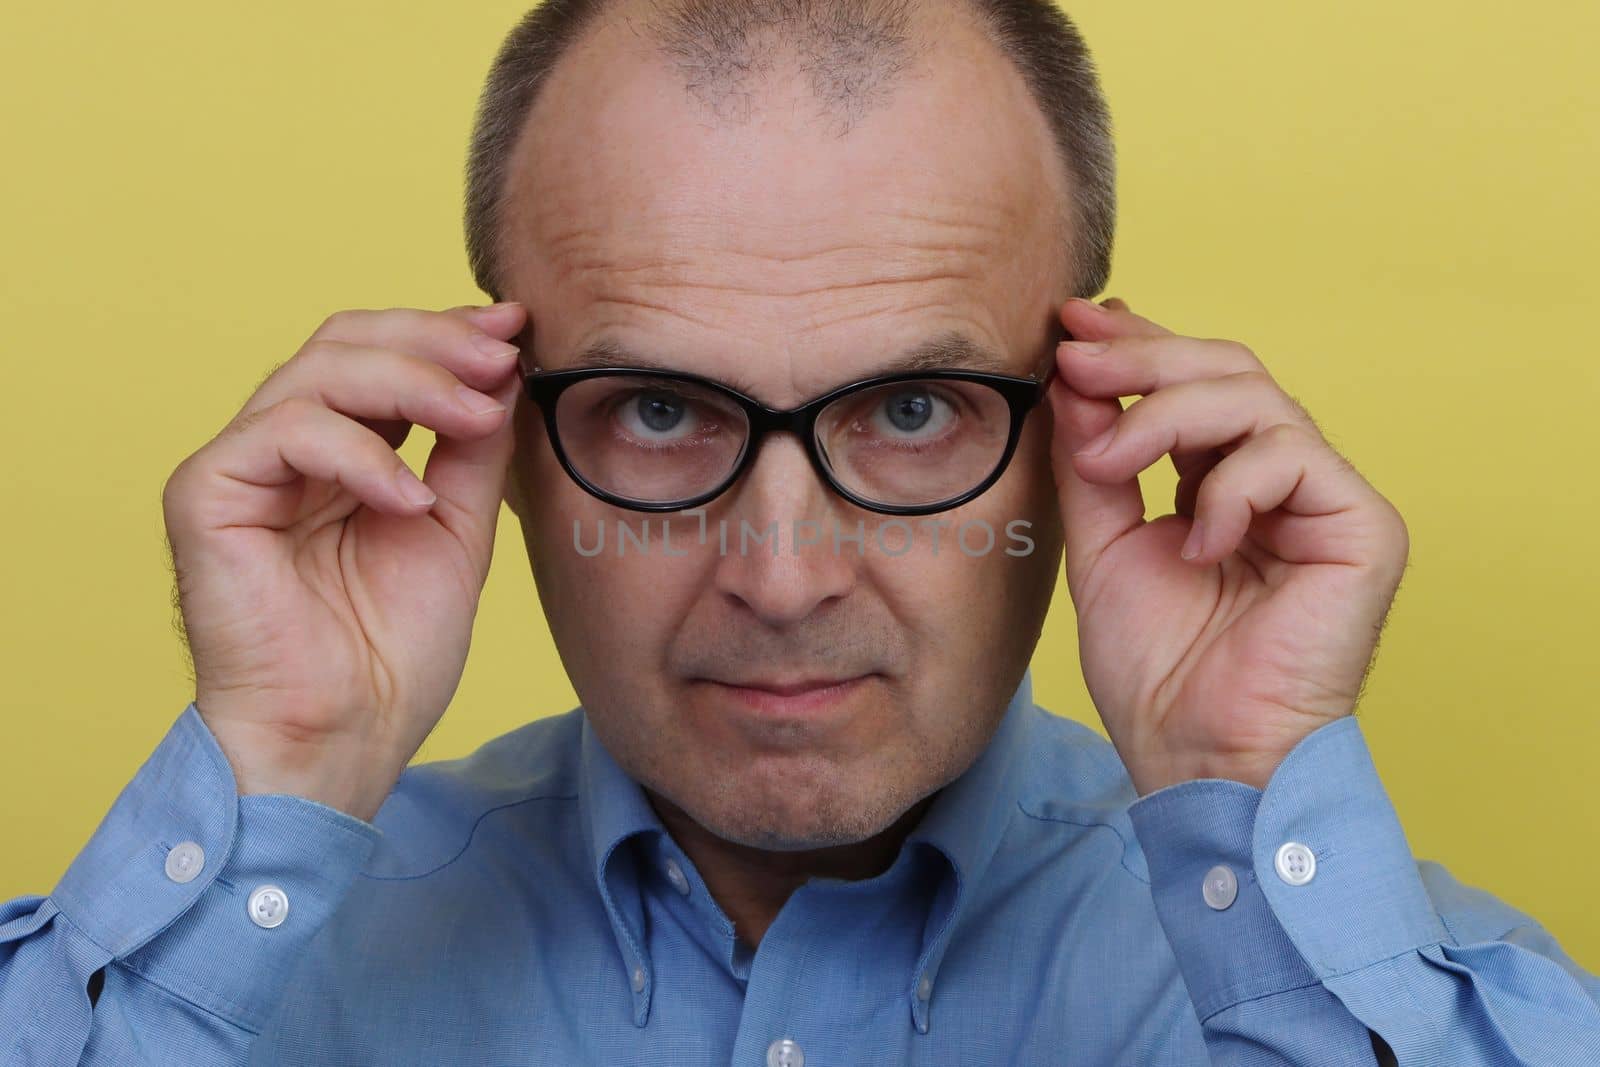 Man in blue shirt on yellow background holding transparent glasses.